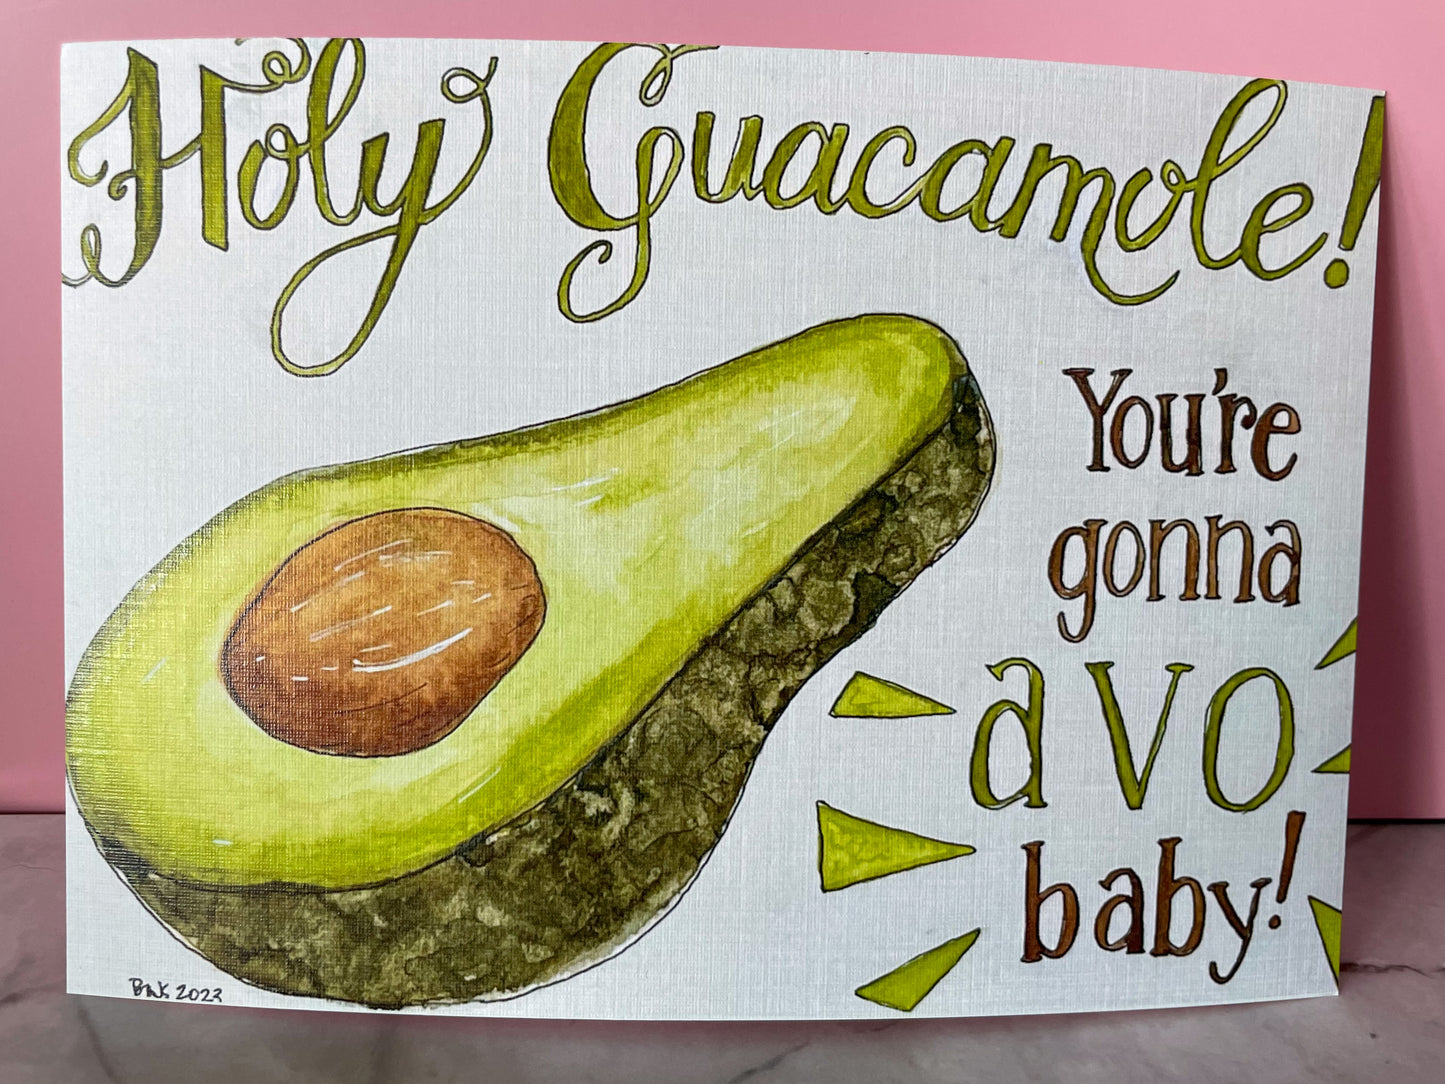 Holy Guacamole, You're Gonna Avo Baby! Card